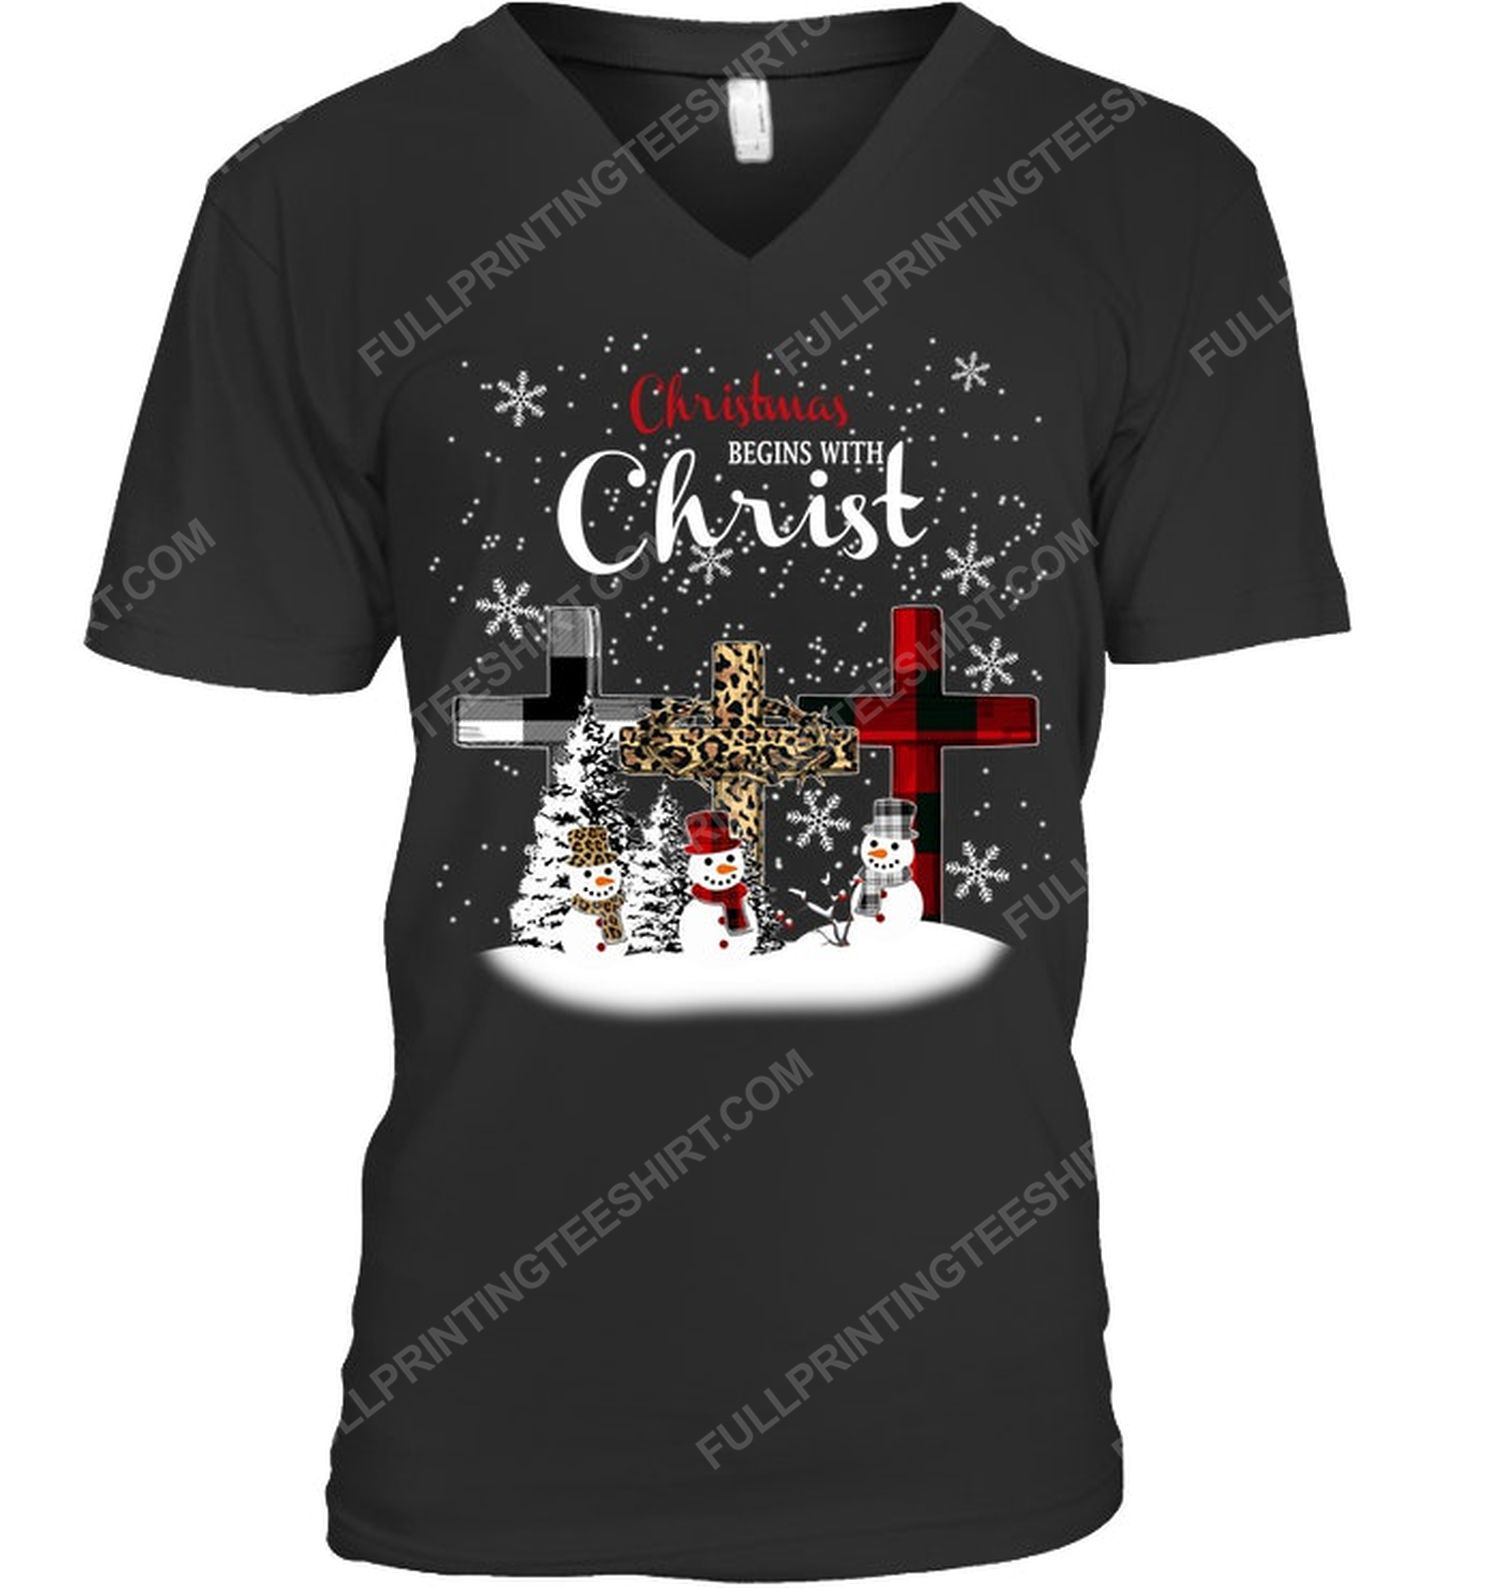 Christmas begins with christ snowman v-neck